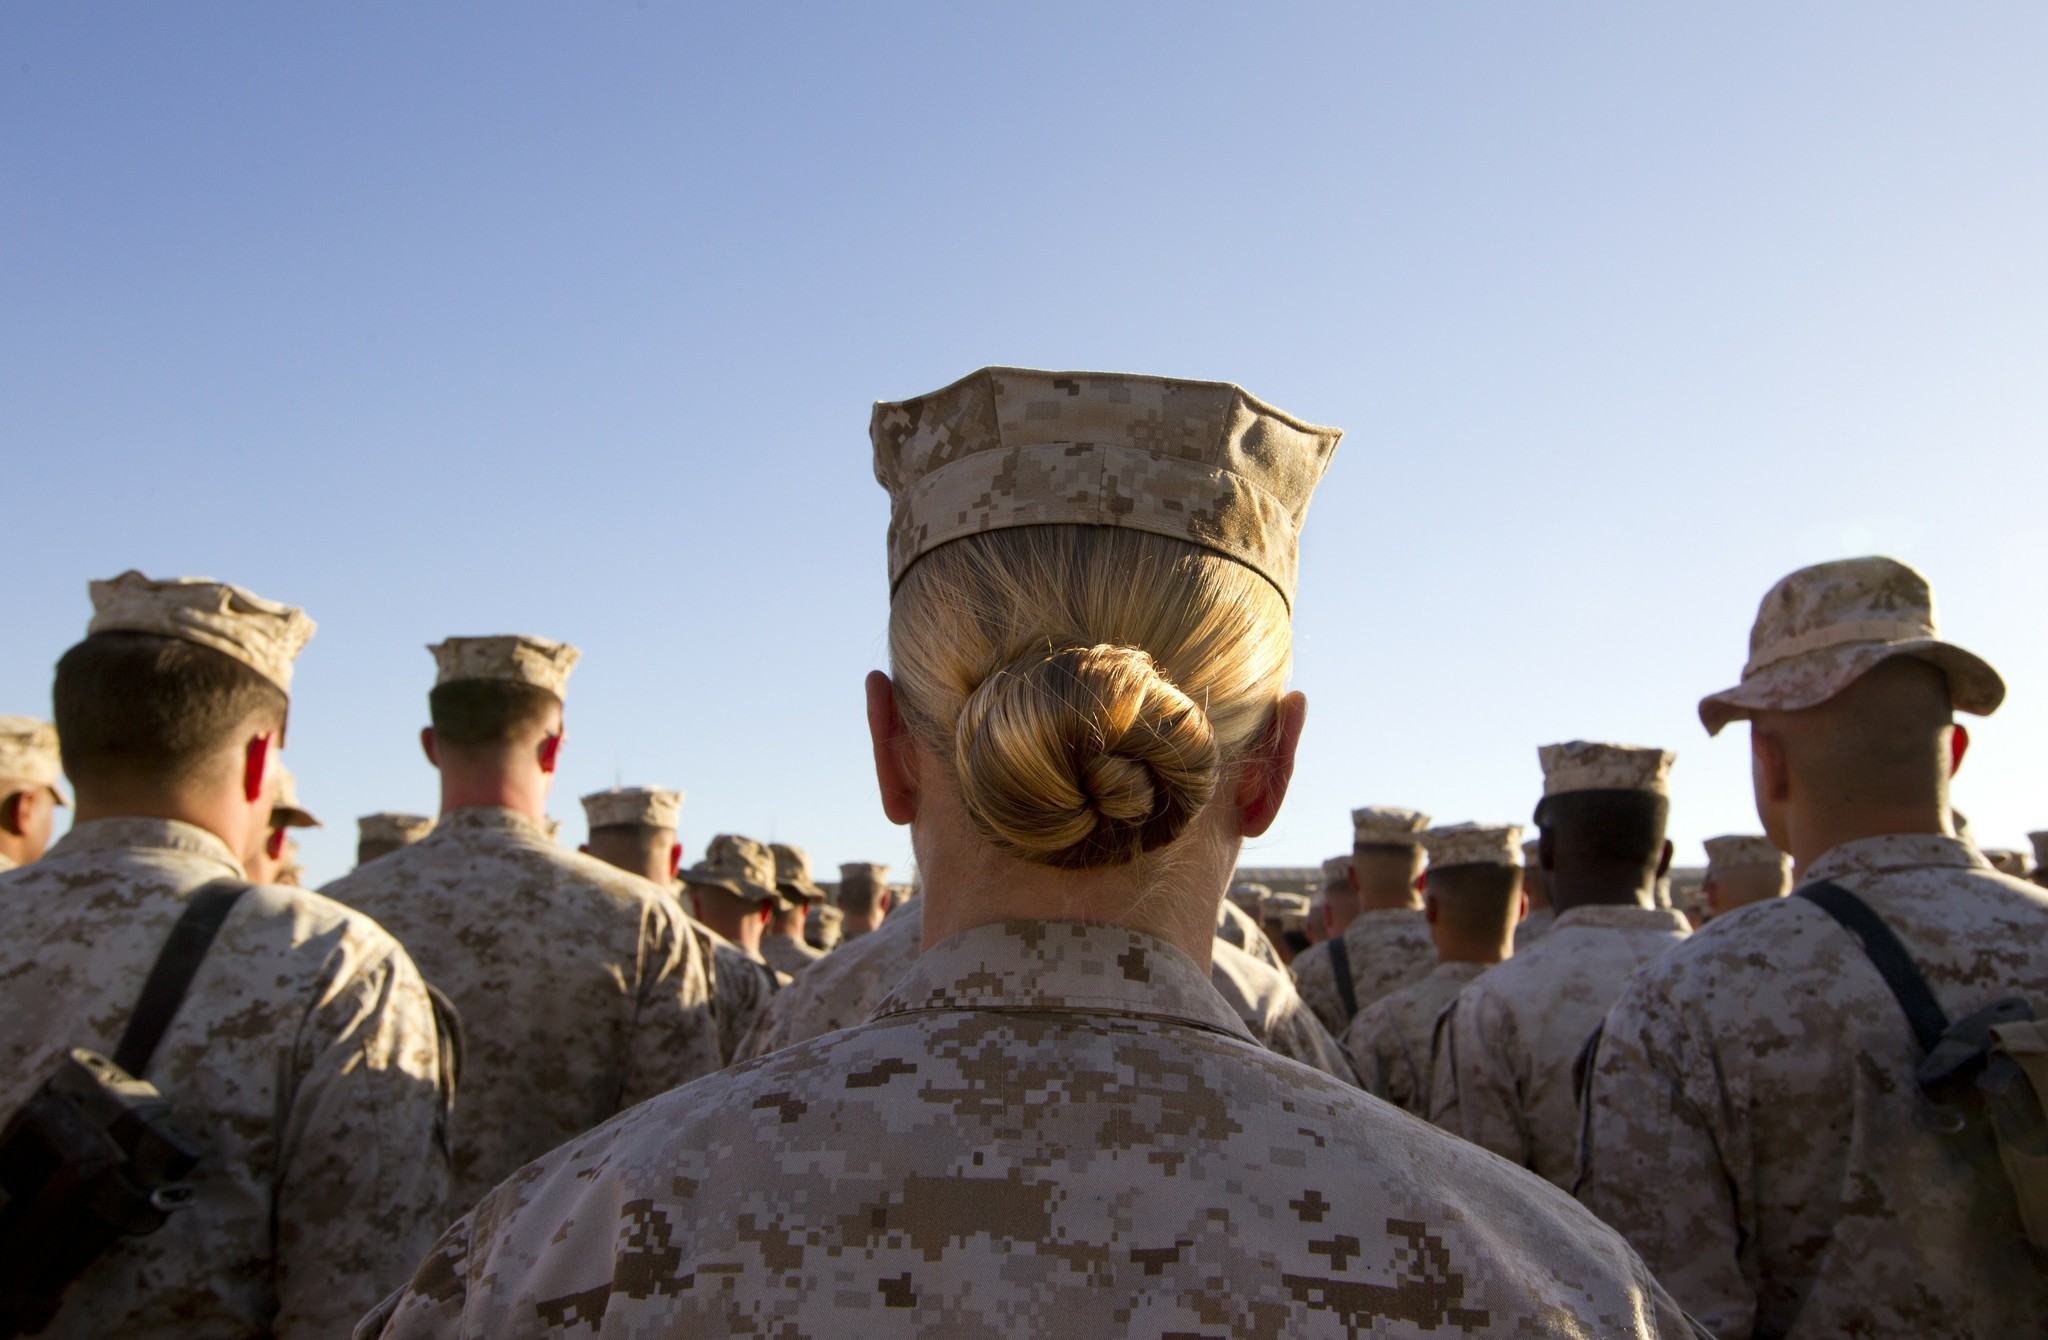 A female marine stands in formation along with her male compatriots on November 10, 2010, at Camp Delaram in Helmand province, Afghanistan.